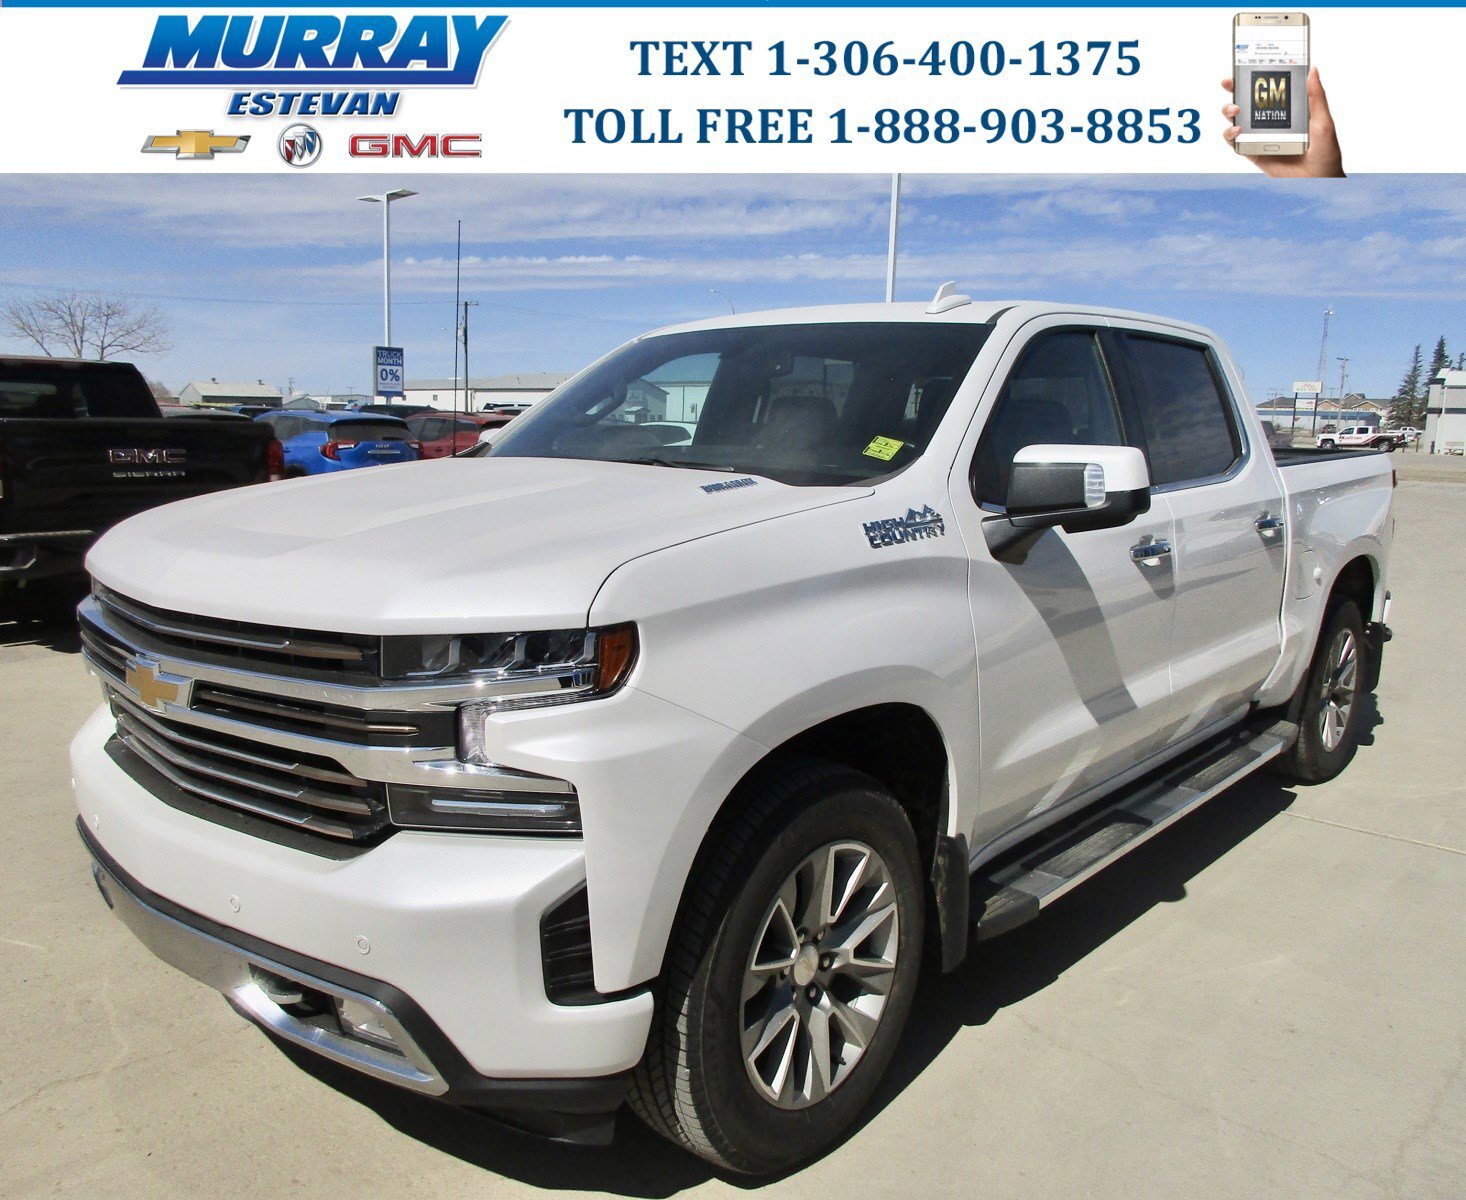 2022 Chevrolet Silverado 1500 High Country DIESEL/ HEAT/COOL LEATHER/ TOW PKG